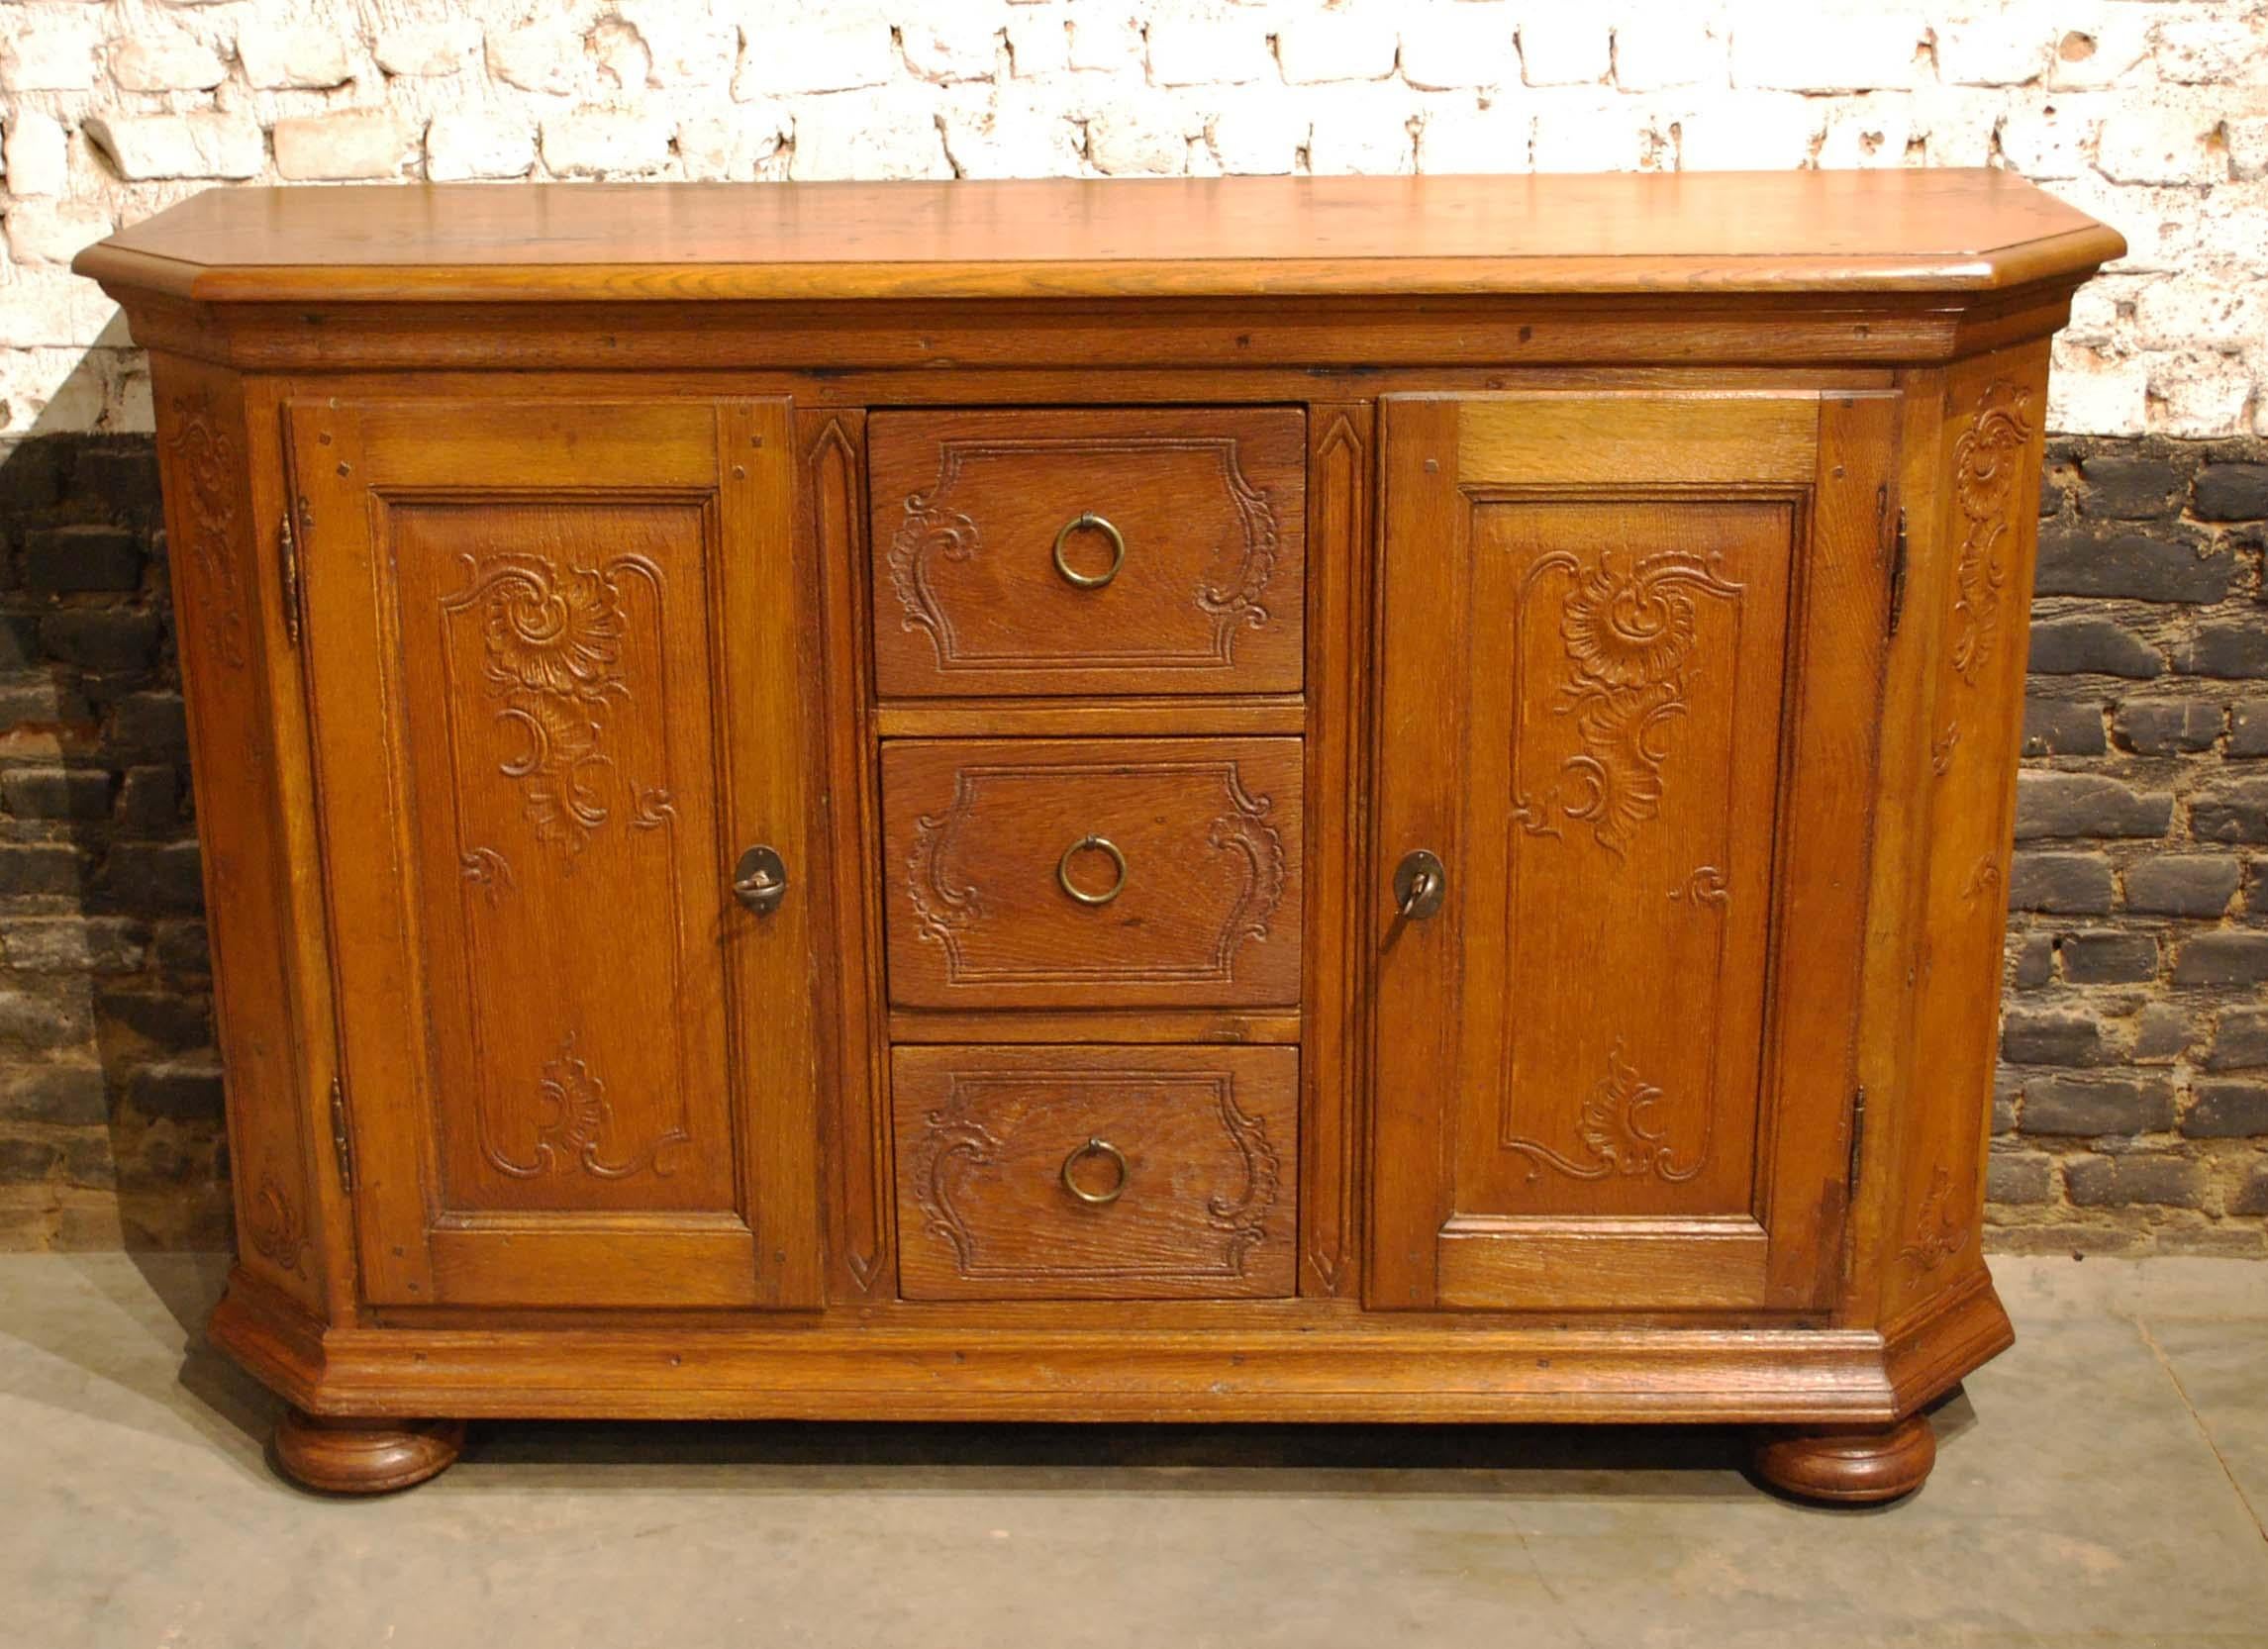 A beautiful honey color German oak dresser with two doors and three drawers. 
The cupboard was made in Germany in the Moselle region in circa 1780. The top has a bullnose profile and is joined to the base by the use of wooden pens. It has sweeping